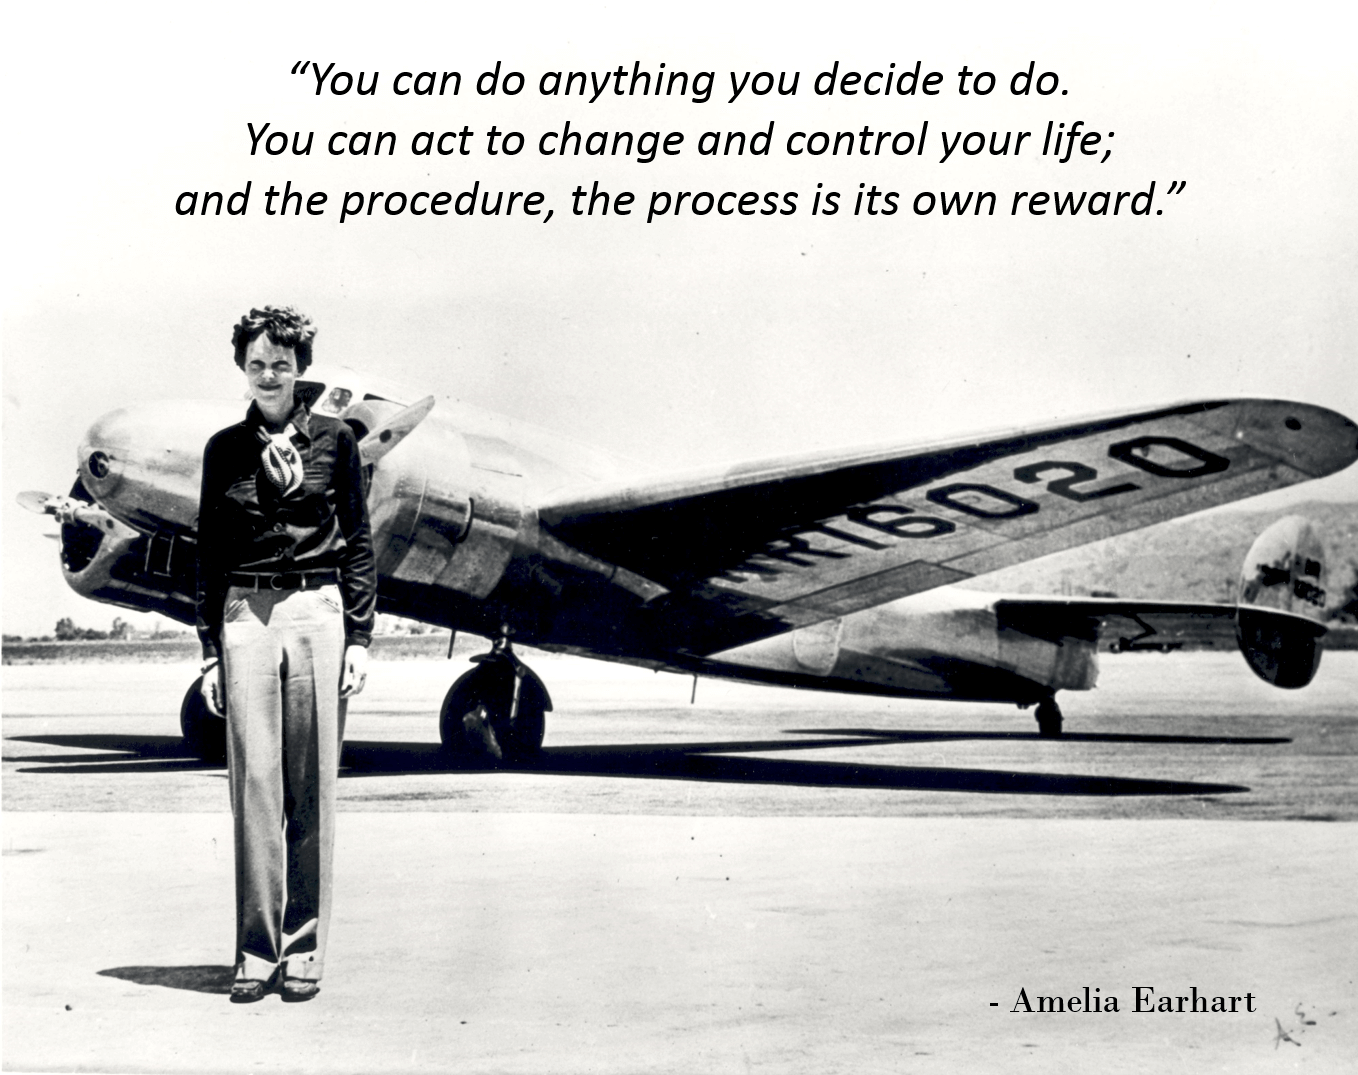 Image of Amelia Earhart and one of her quotes